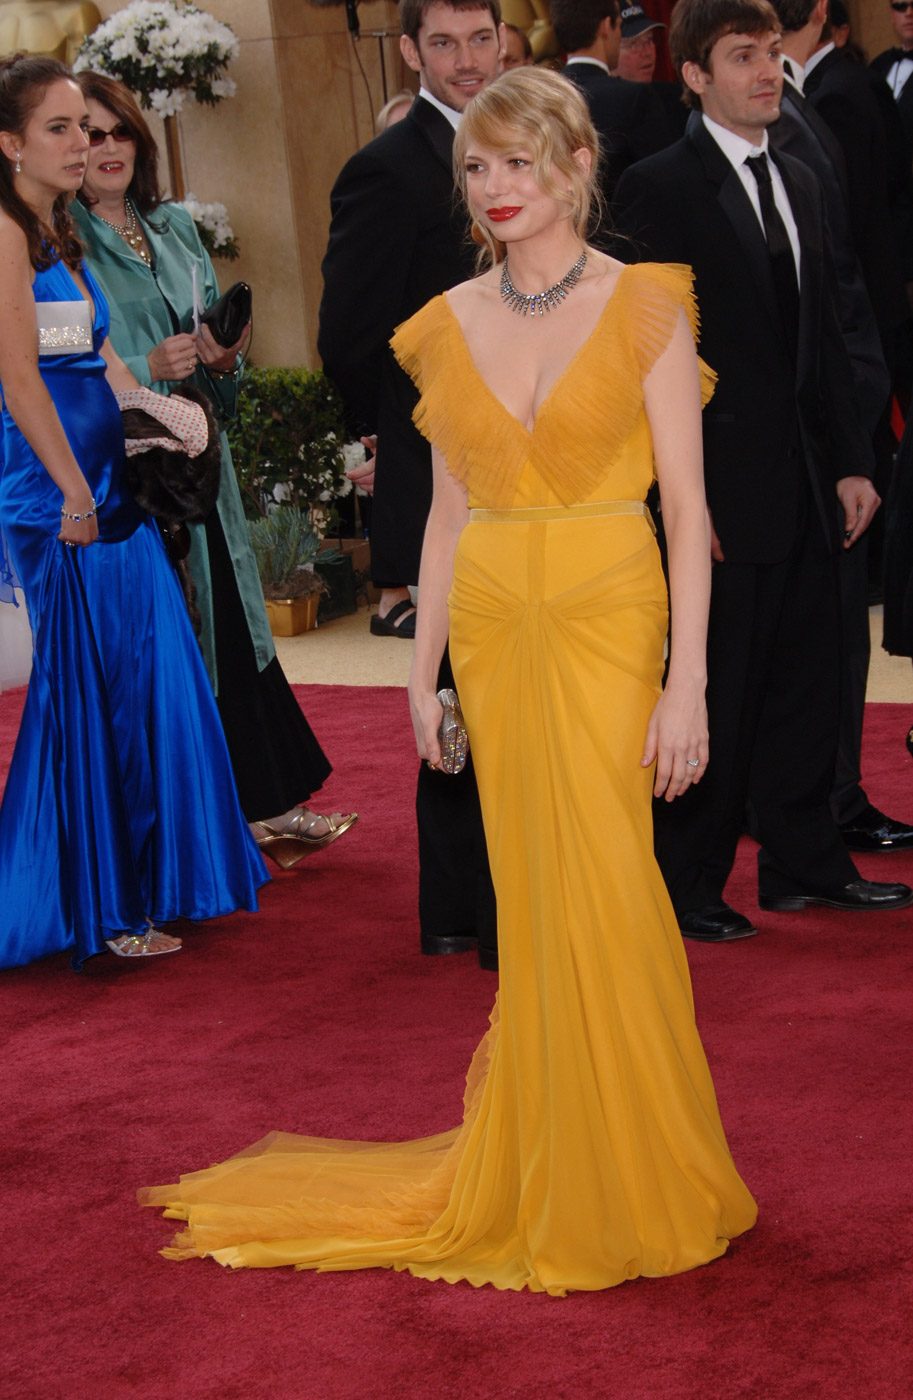 COLOR BLOCK. Michelle Williams plays with color in a Vera Wang gown.

 